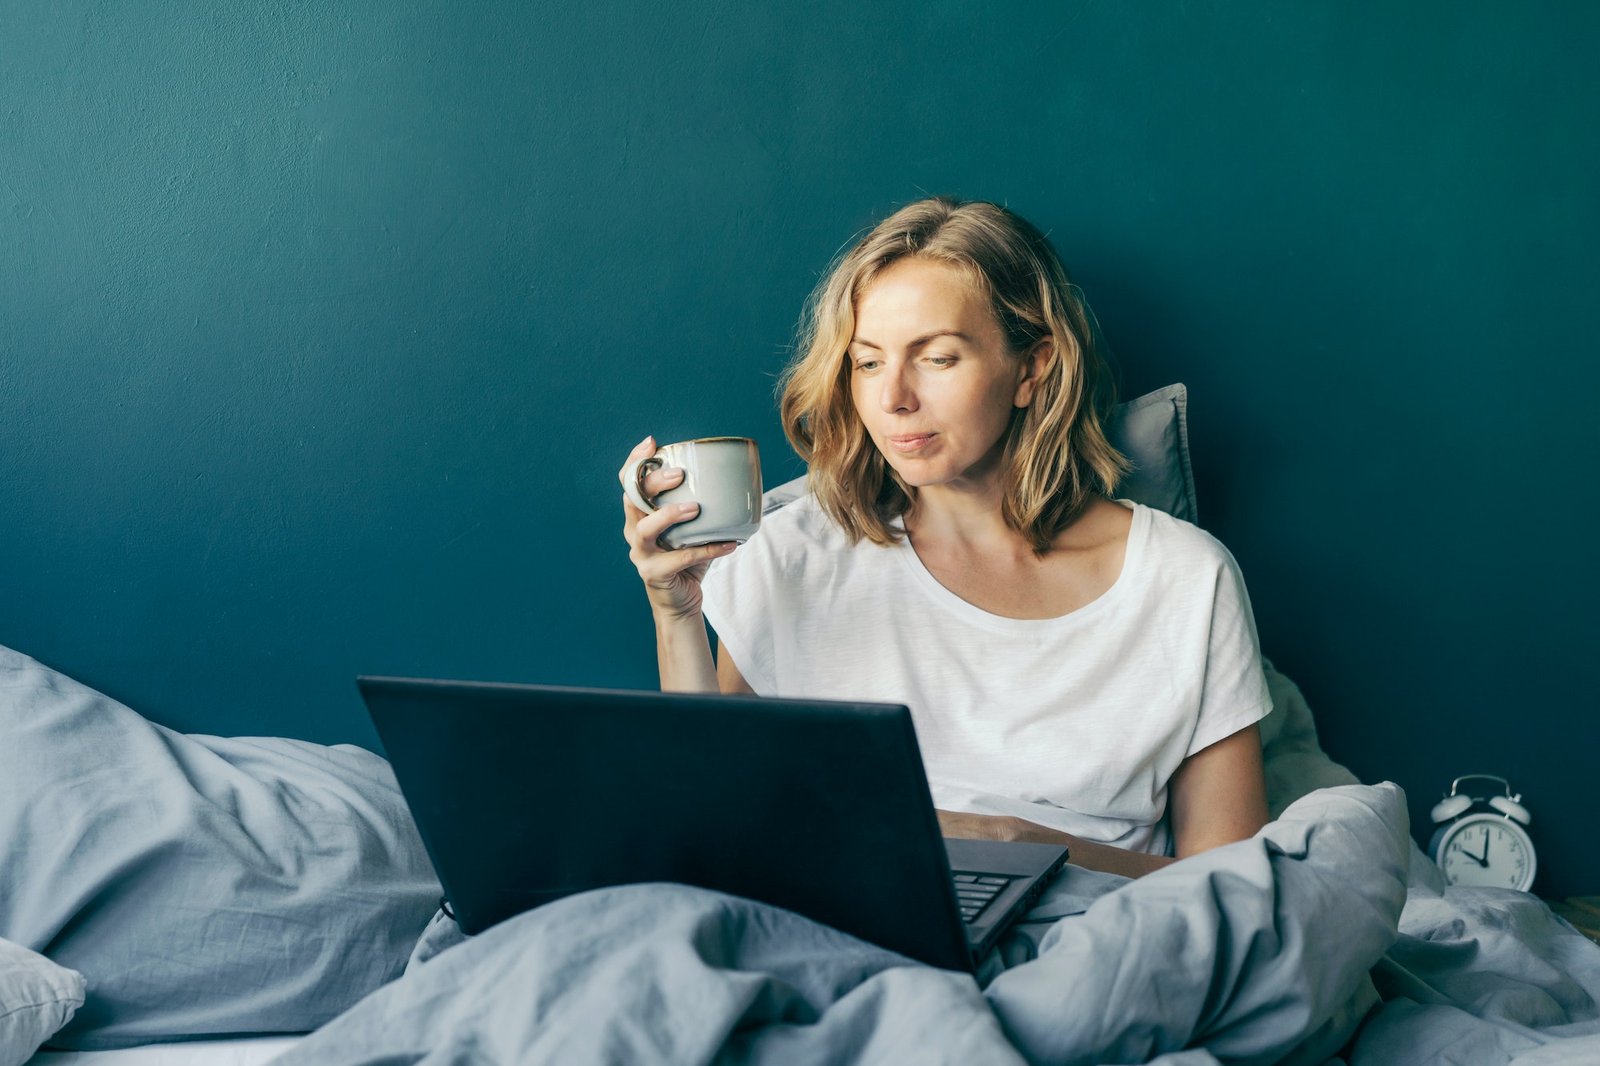 A woman is sitting in bed and typing on a laptop.